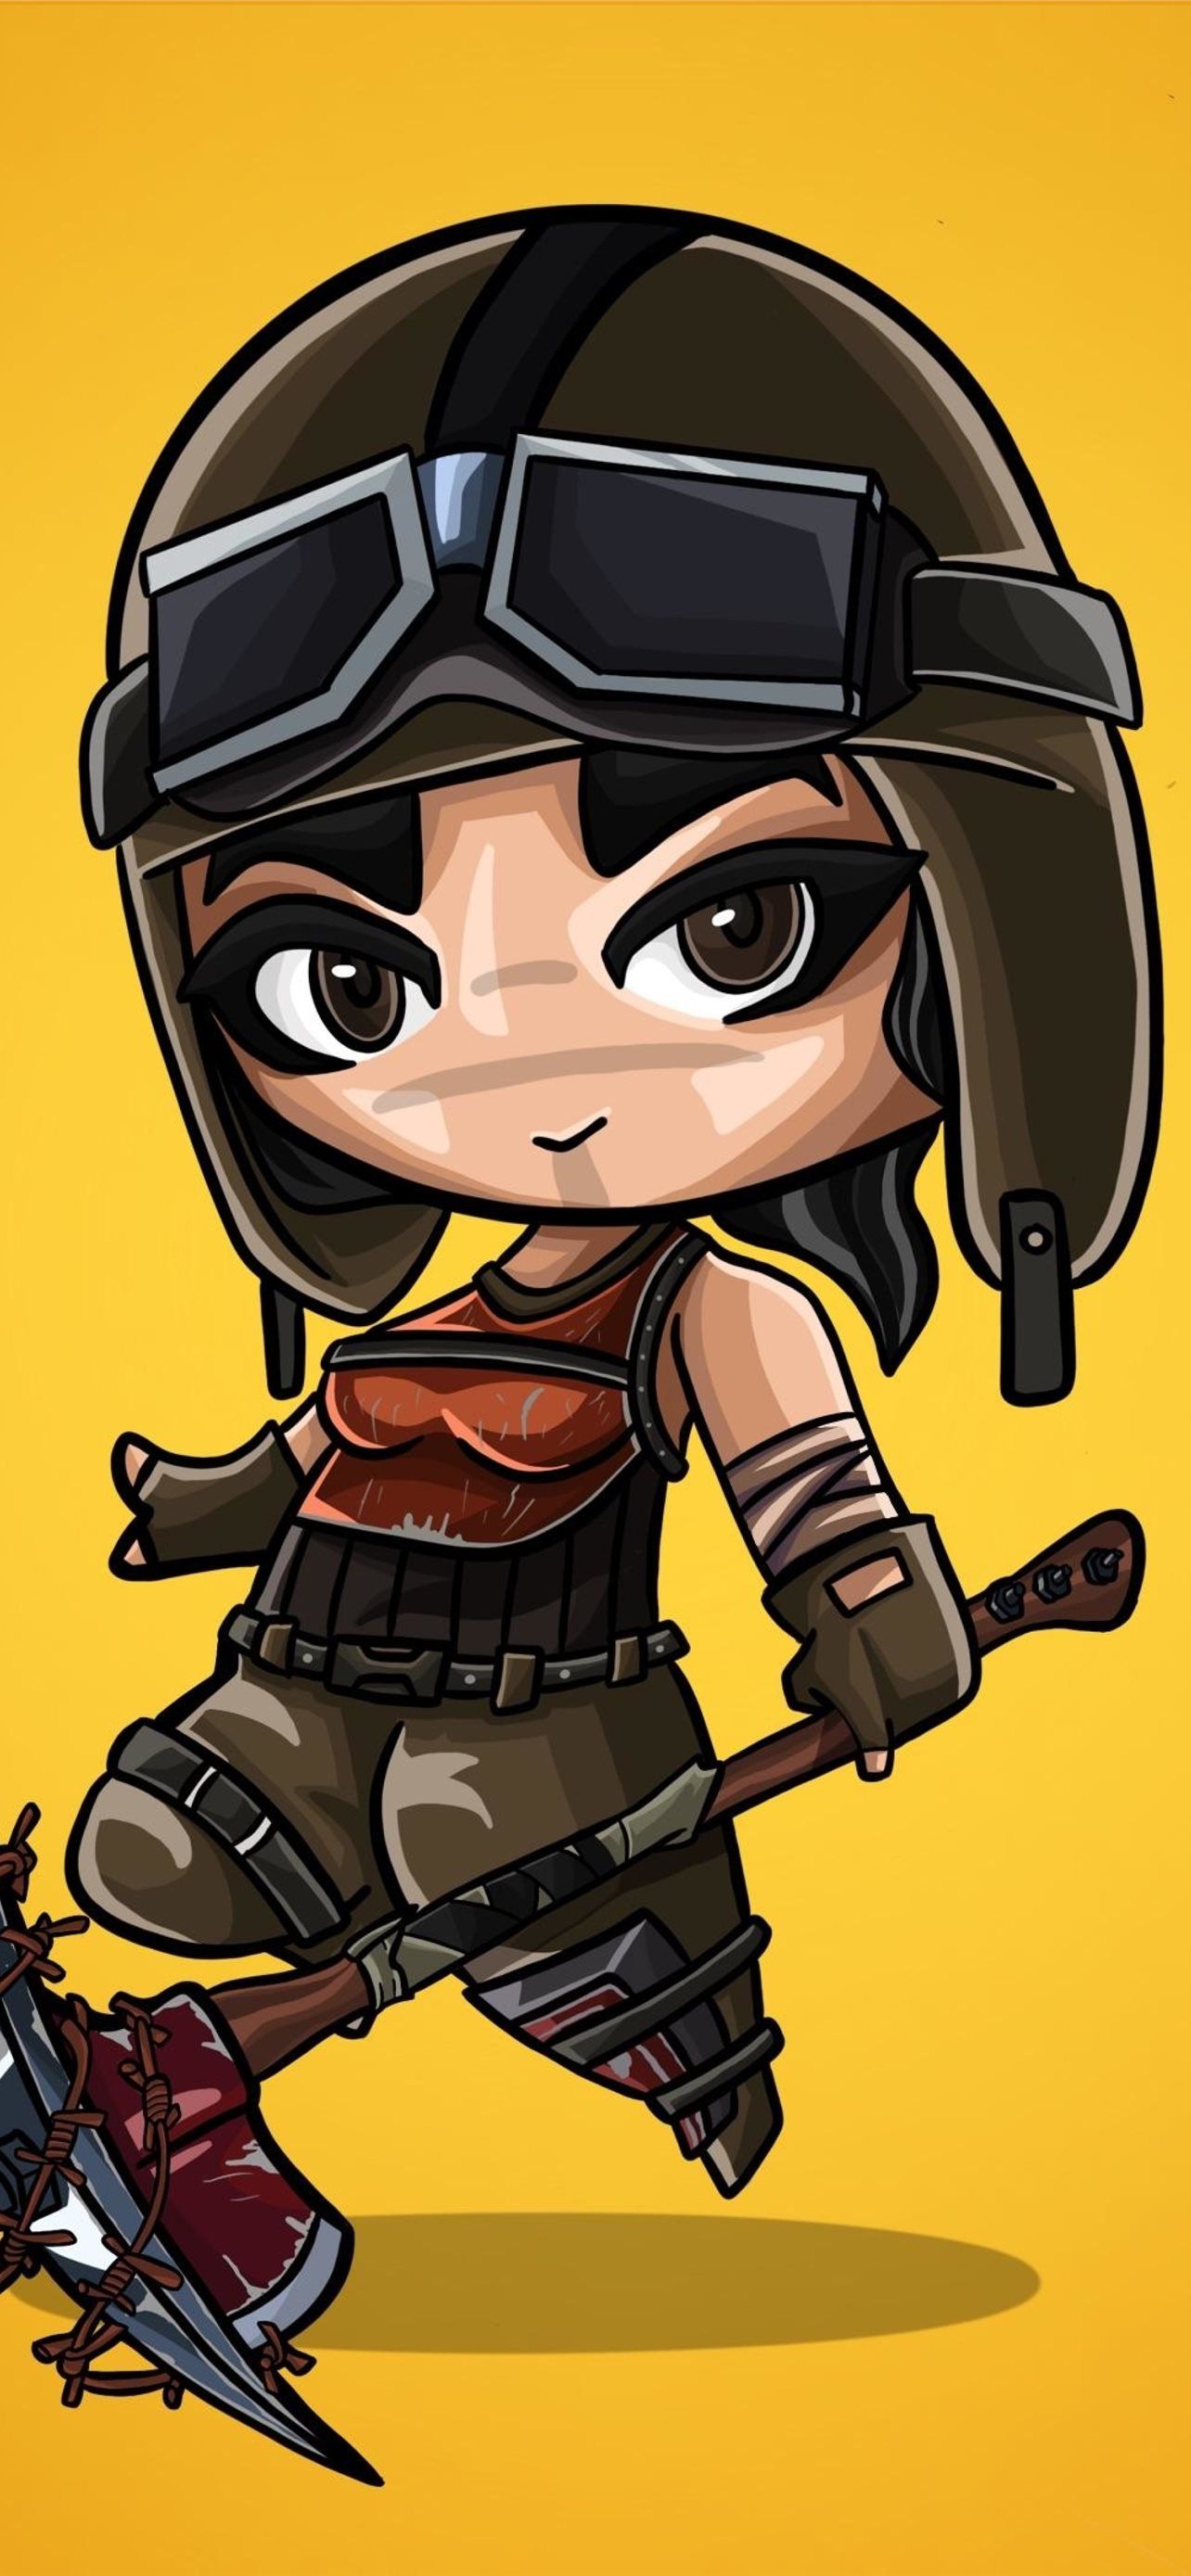 Chibi wallpaper of the character from the game, rainbow six - Fortnite